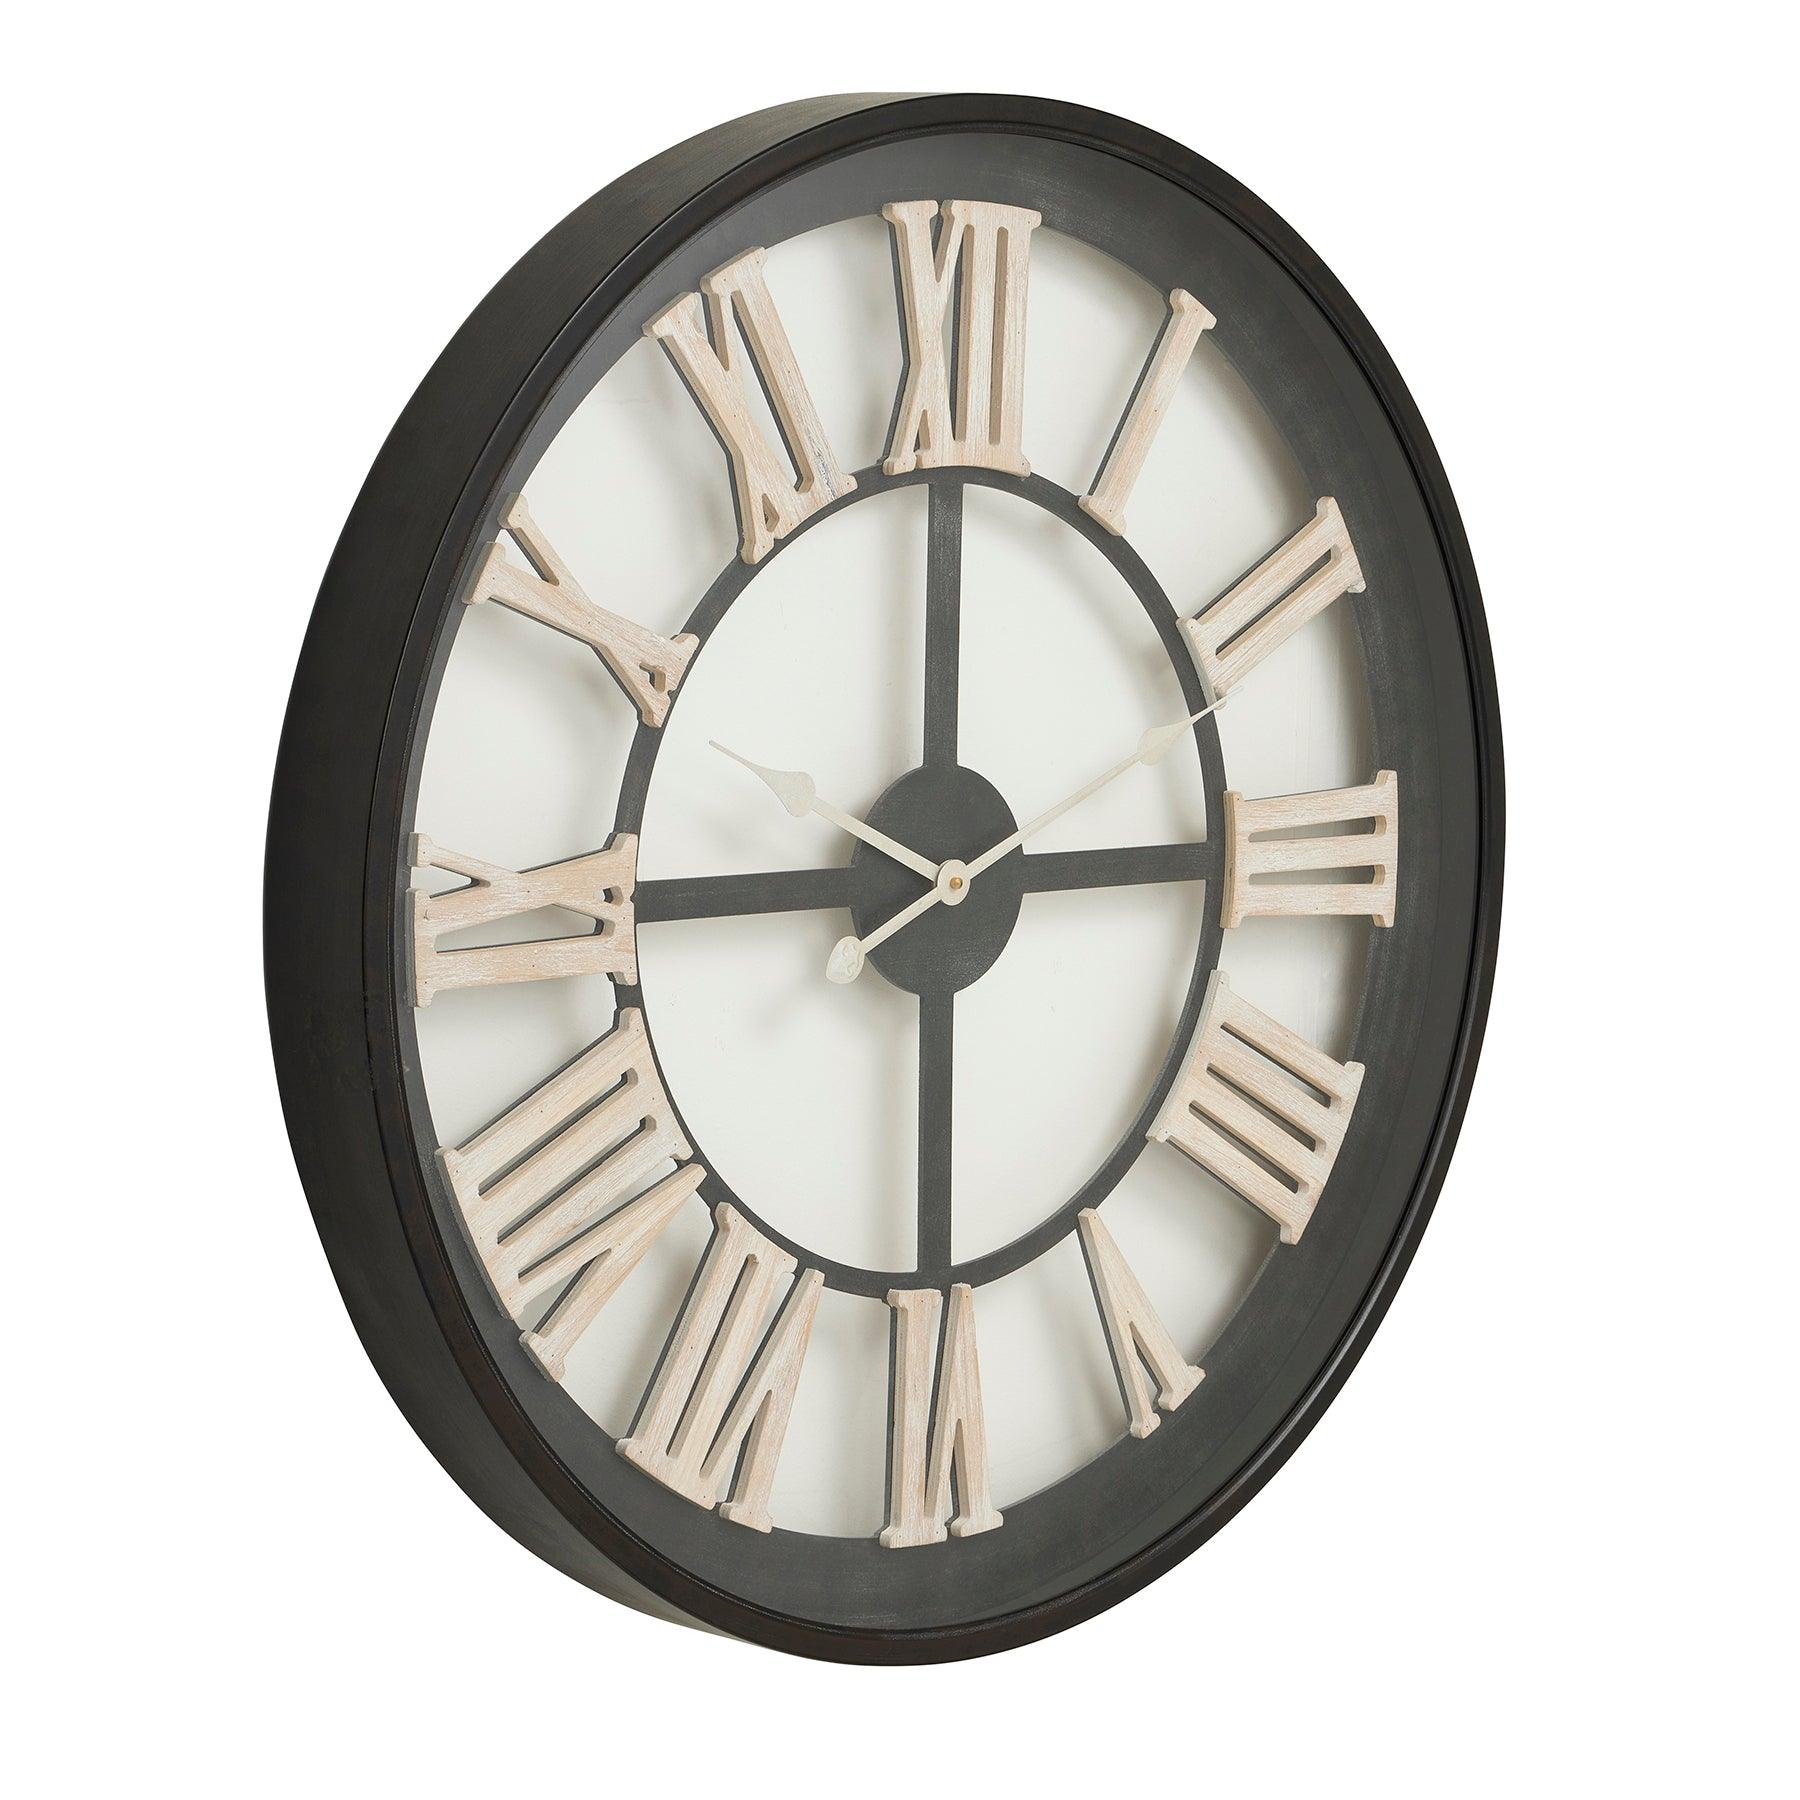 View Black Framed Skeleton Clock With White Roman Numerals information